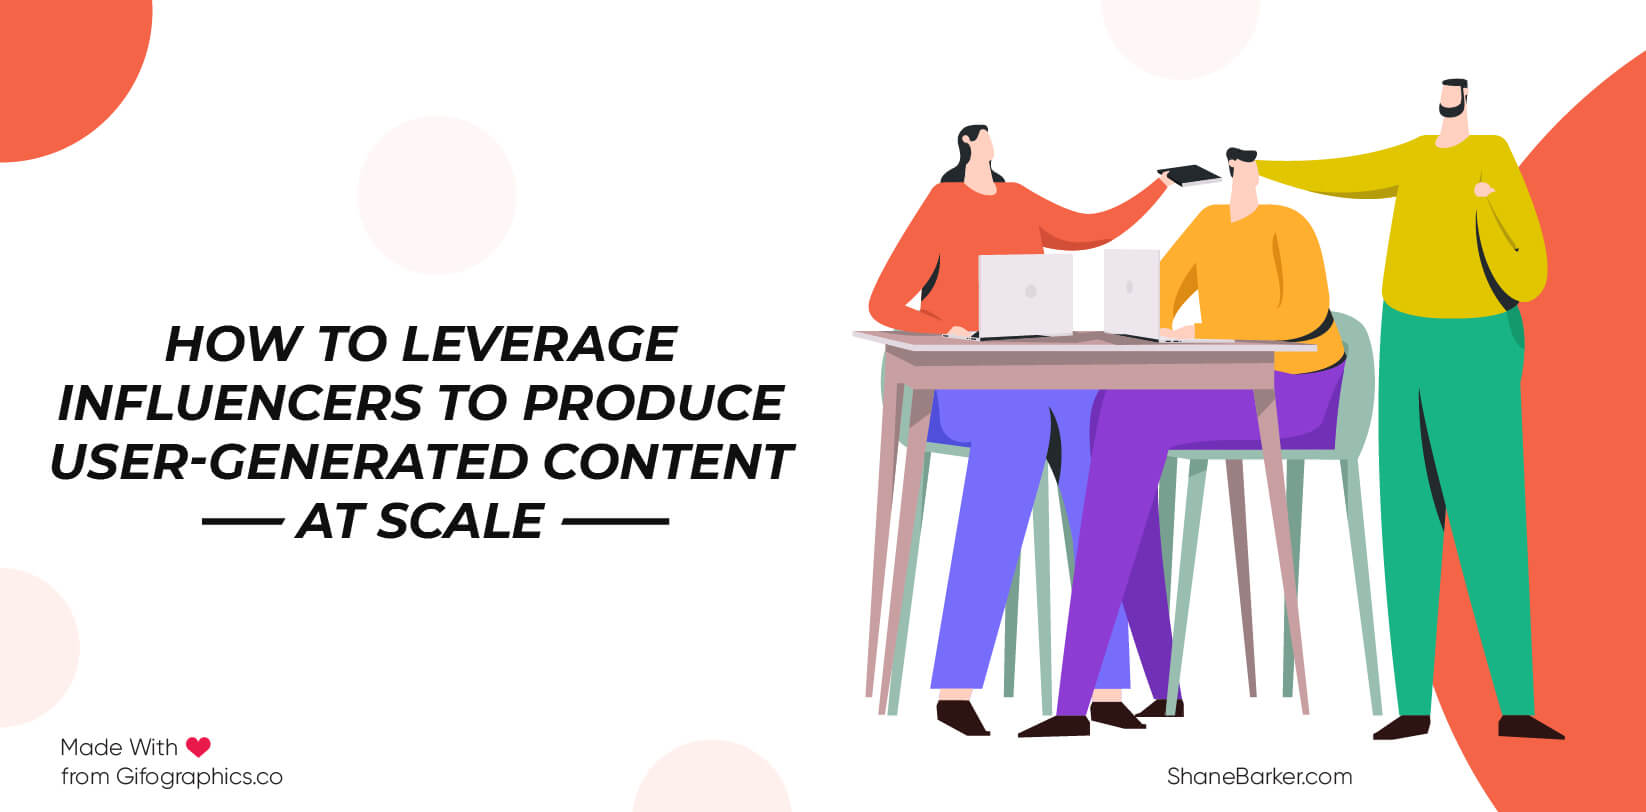 how to leverage influencers to produce user-generated content at scale